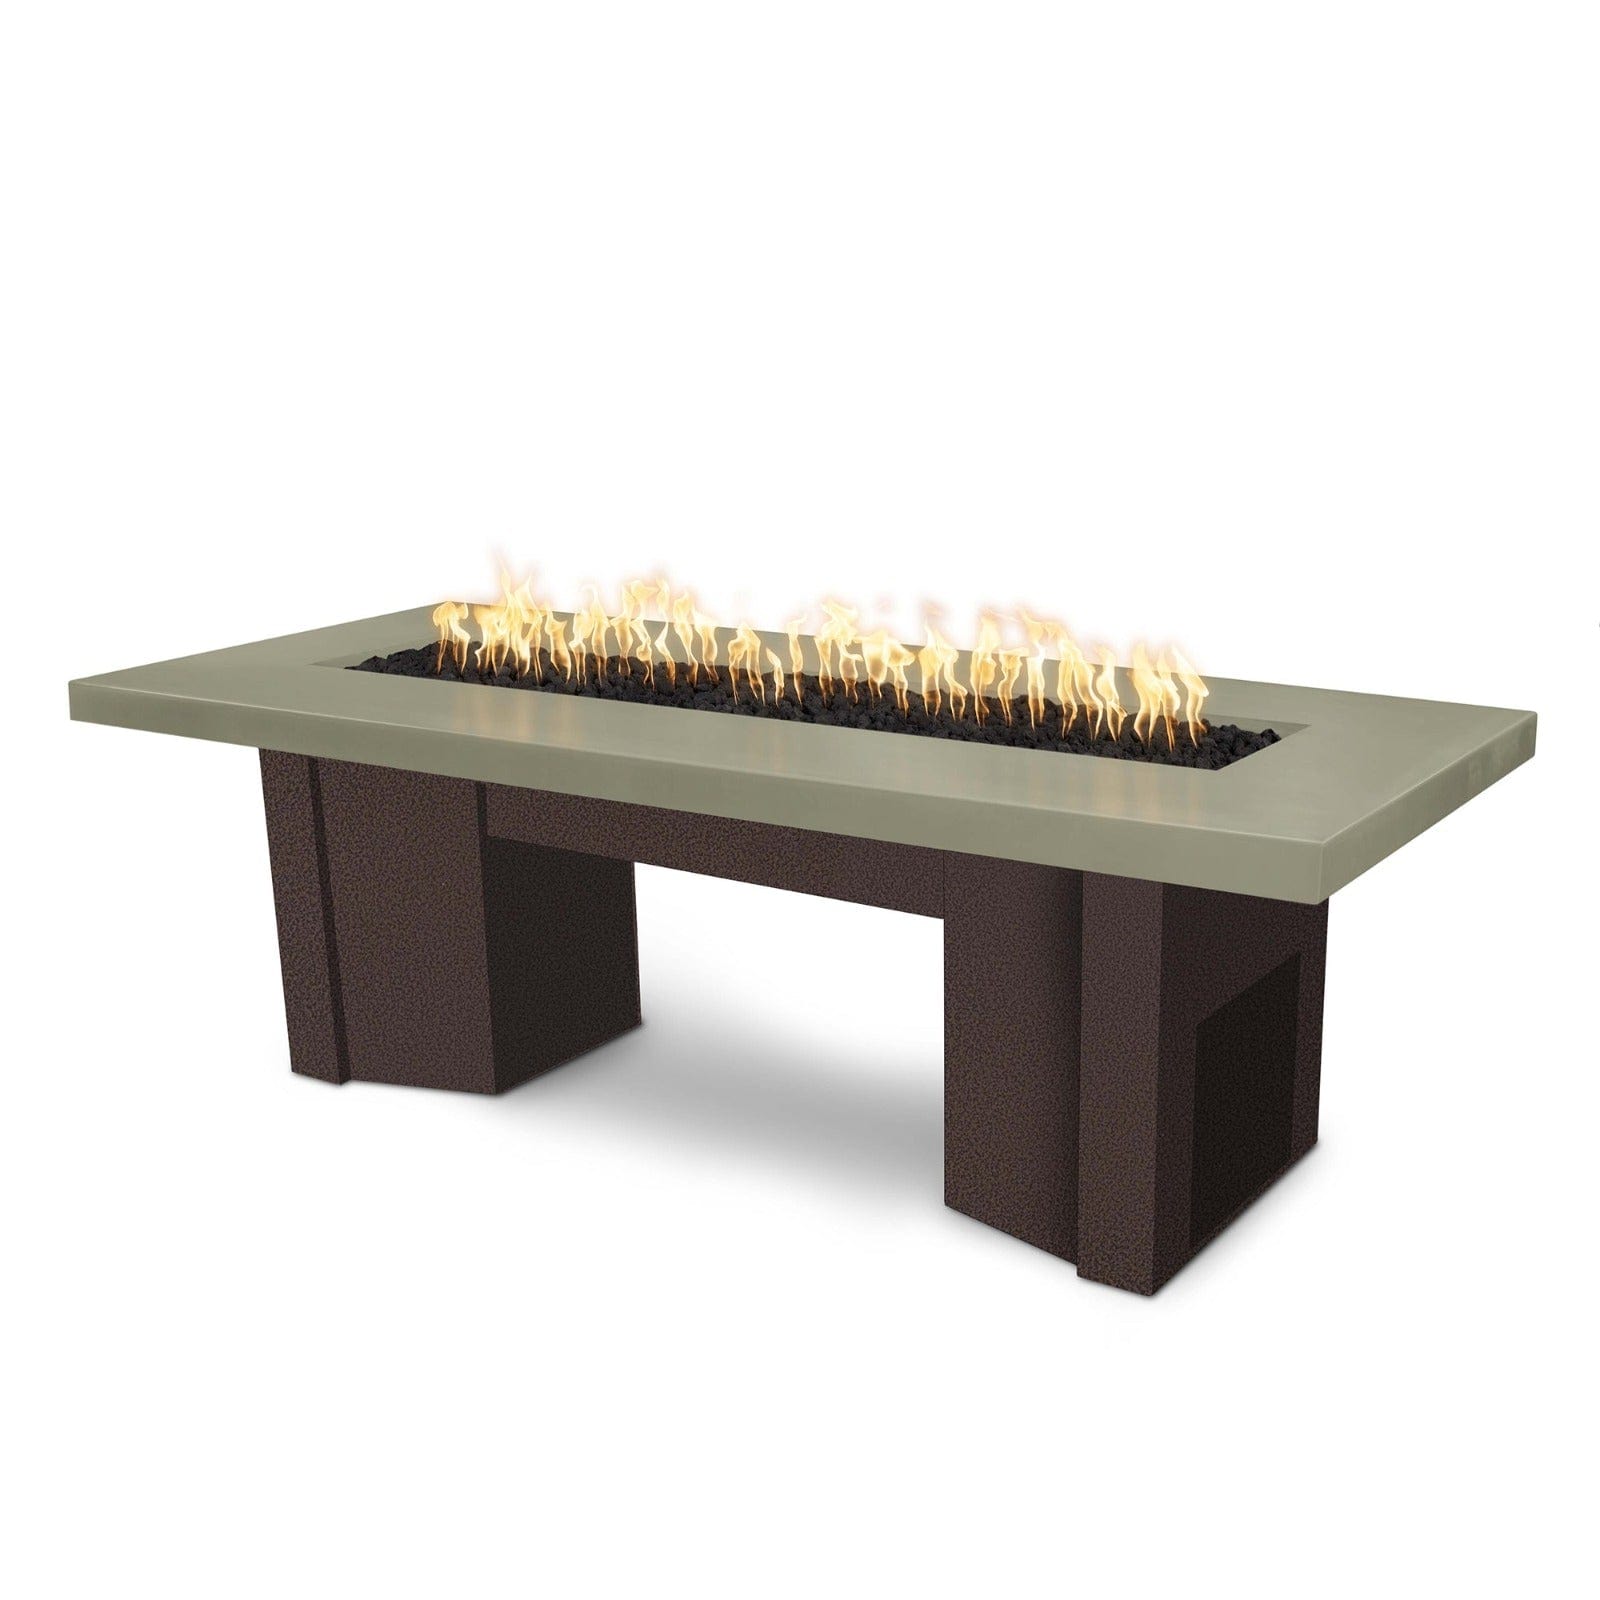 The Outdoor Plus Fire Features Ash (-ASH) / Copper Vein Powder Coated Steel (-CPV) The Outdoor Plus 78" Alameda Fire Table Smooth Concrete in Liquid Propane - 12V Electronic Ignition / OPT-ALMGFRC78E12V-LP